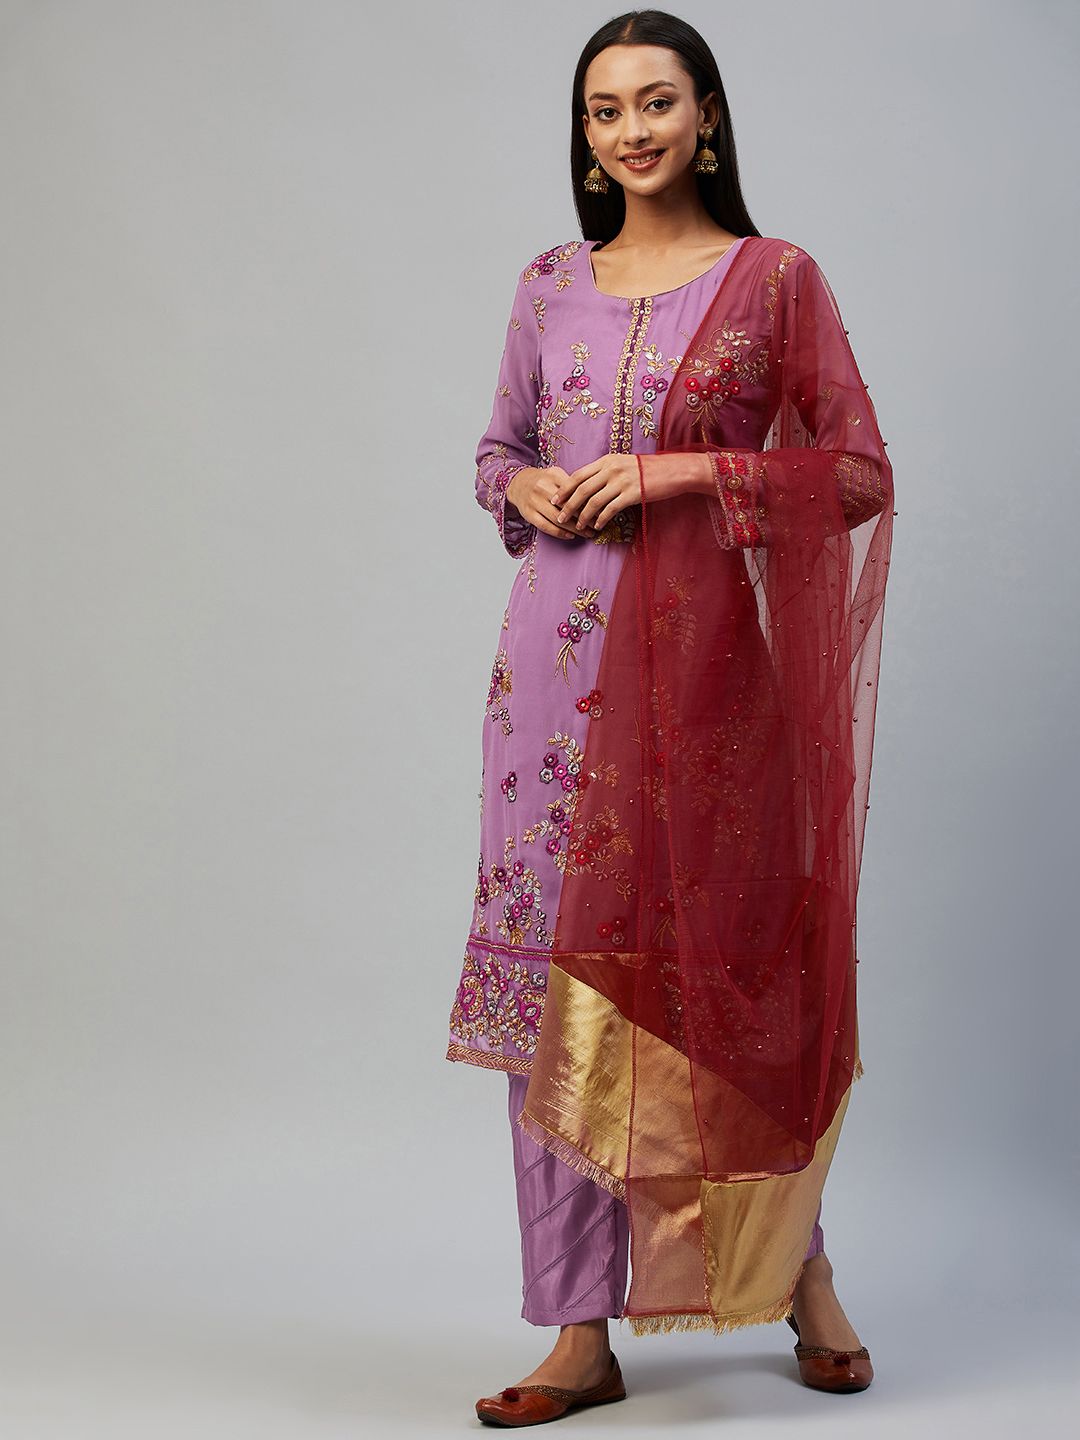 Readiprint Fashions Purple & Maroon Embroidered Unstitched Dress Material Price in India